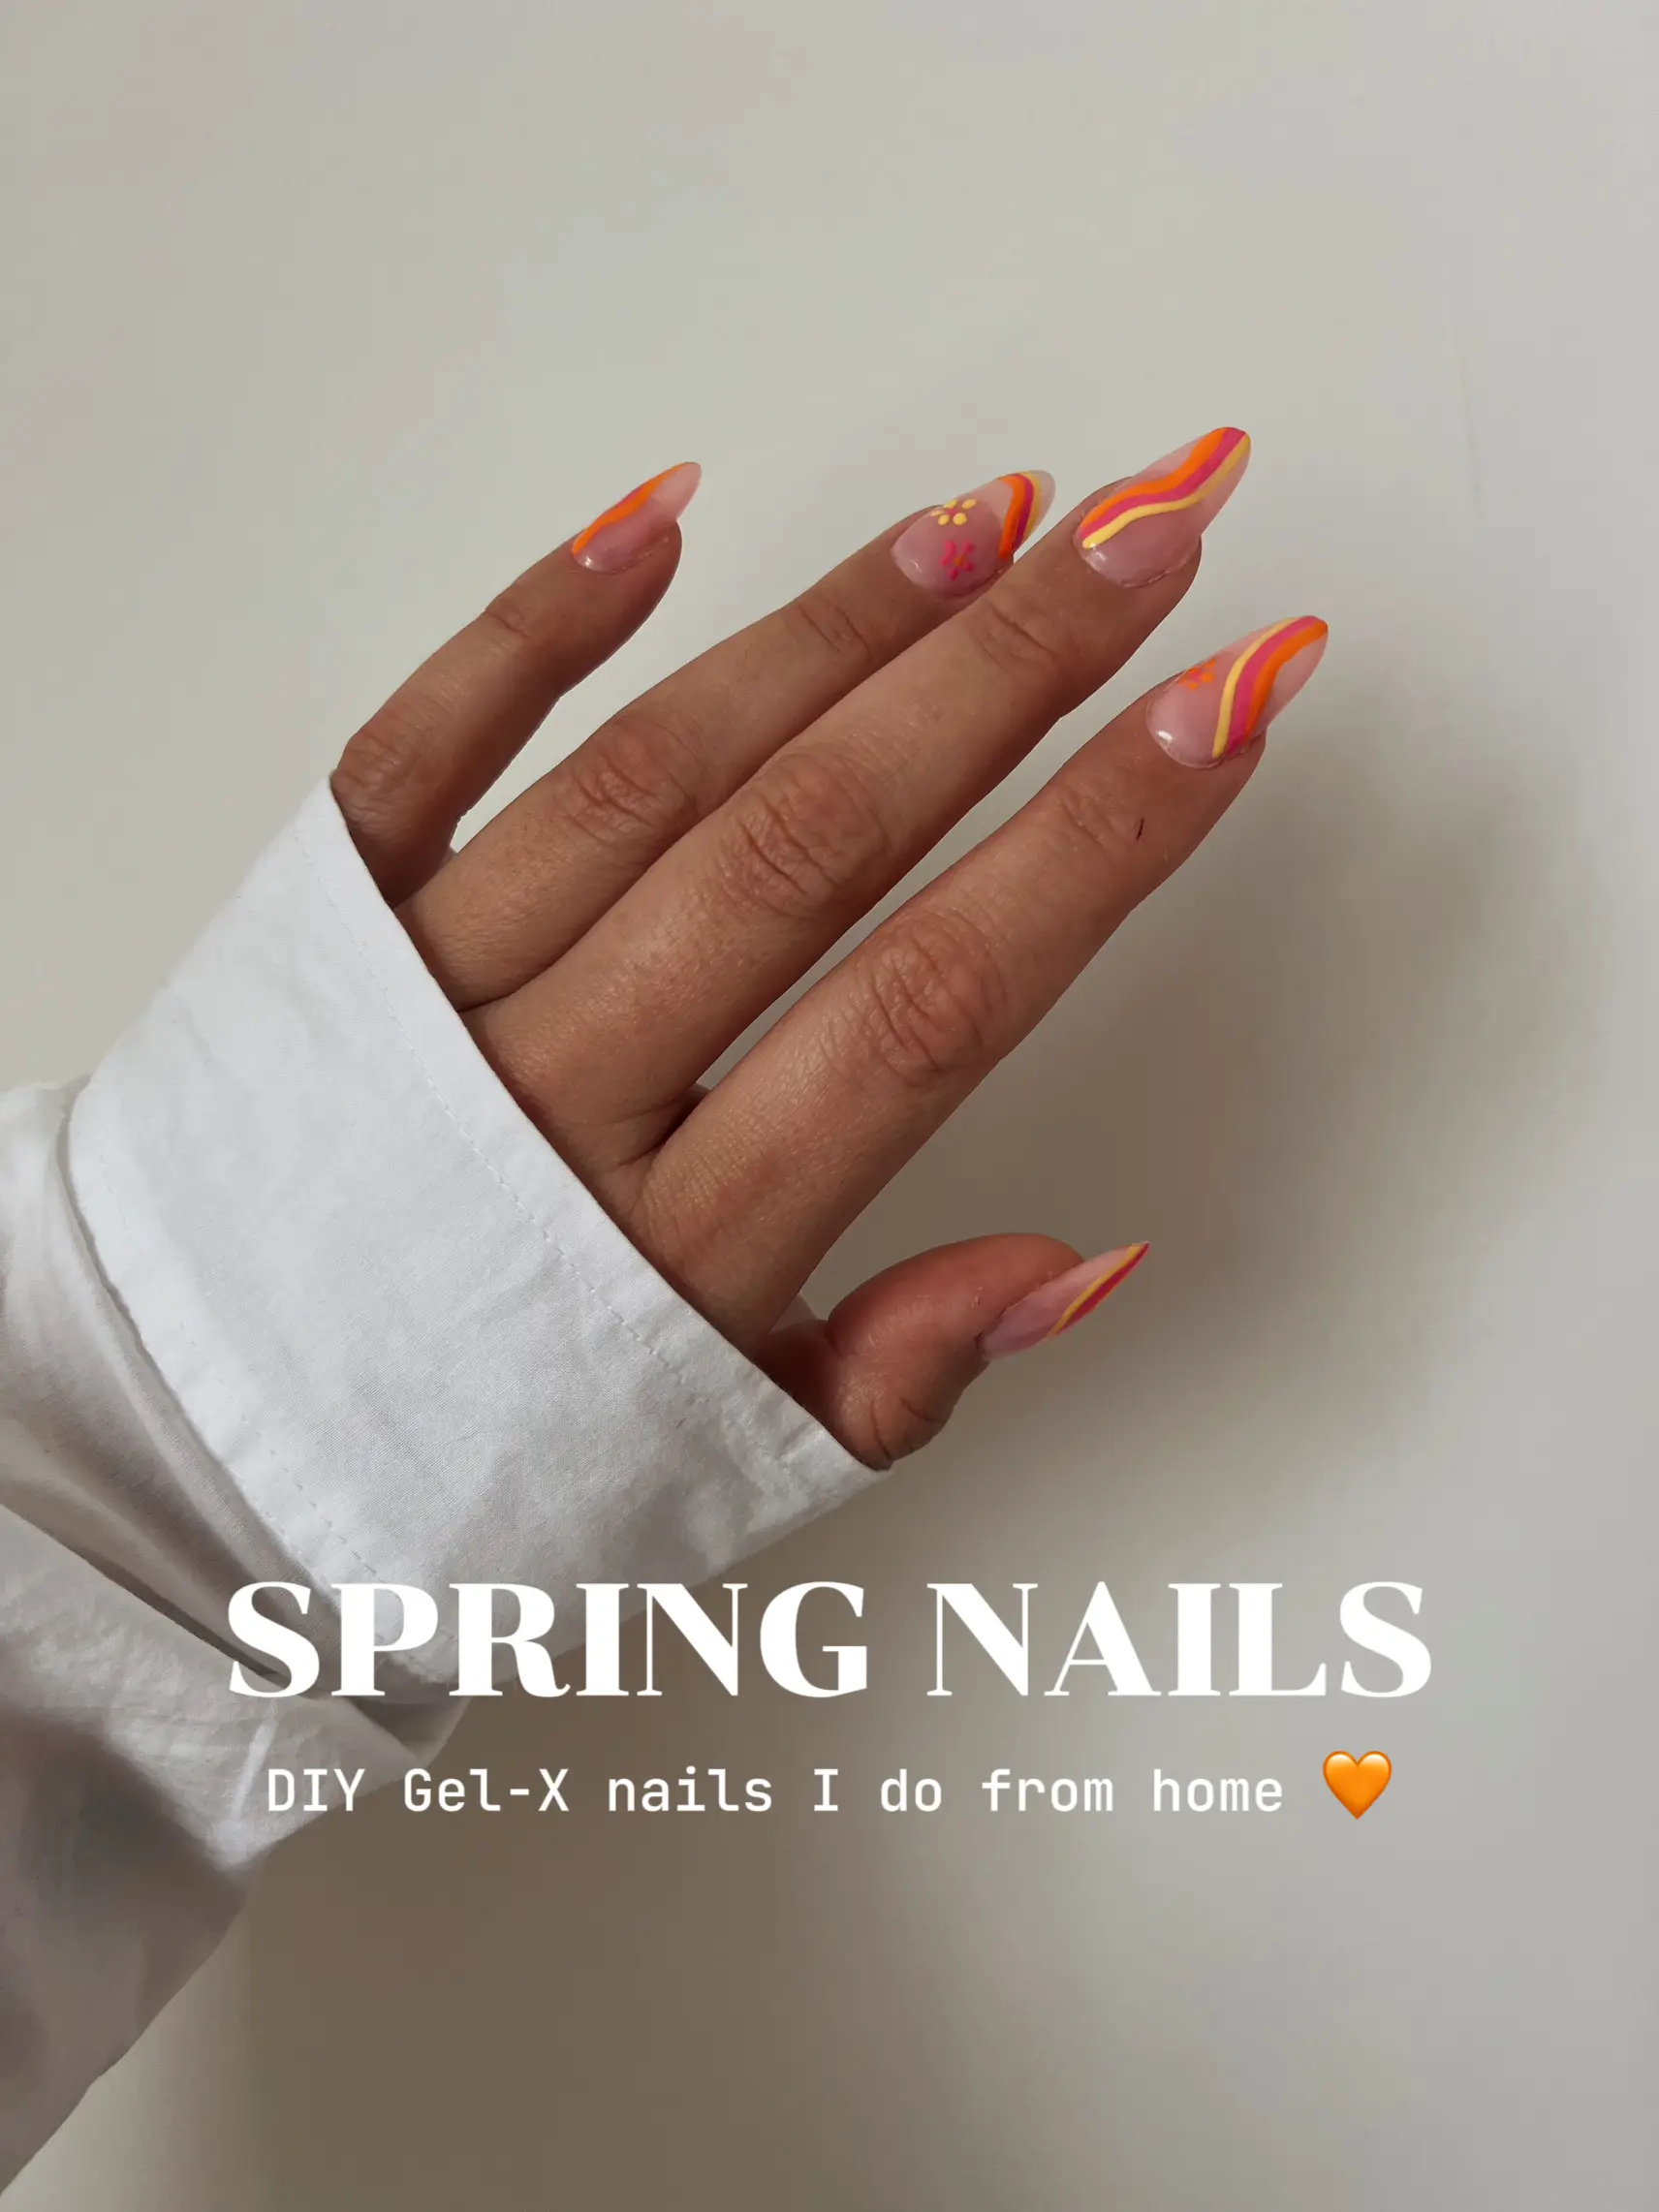 Gel-x nails I do from home 🫶🏻, Gallery posted by Kayla Neumann